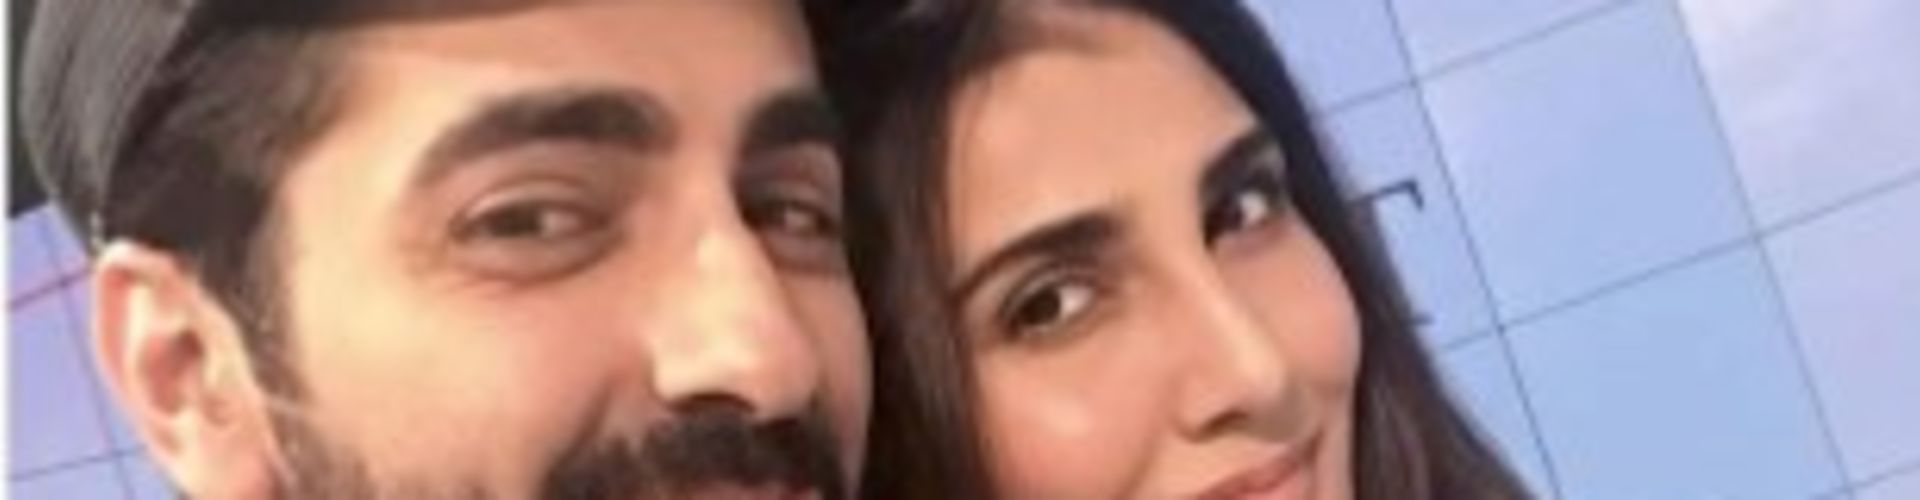 Ayushmann Khurrana's birthday wish for Vaani Kapoor- 'Can't wait for the world to see you as Maanvi in Chandigarh Kare Aashiqui'